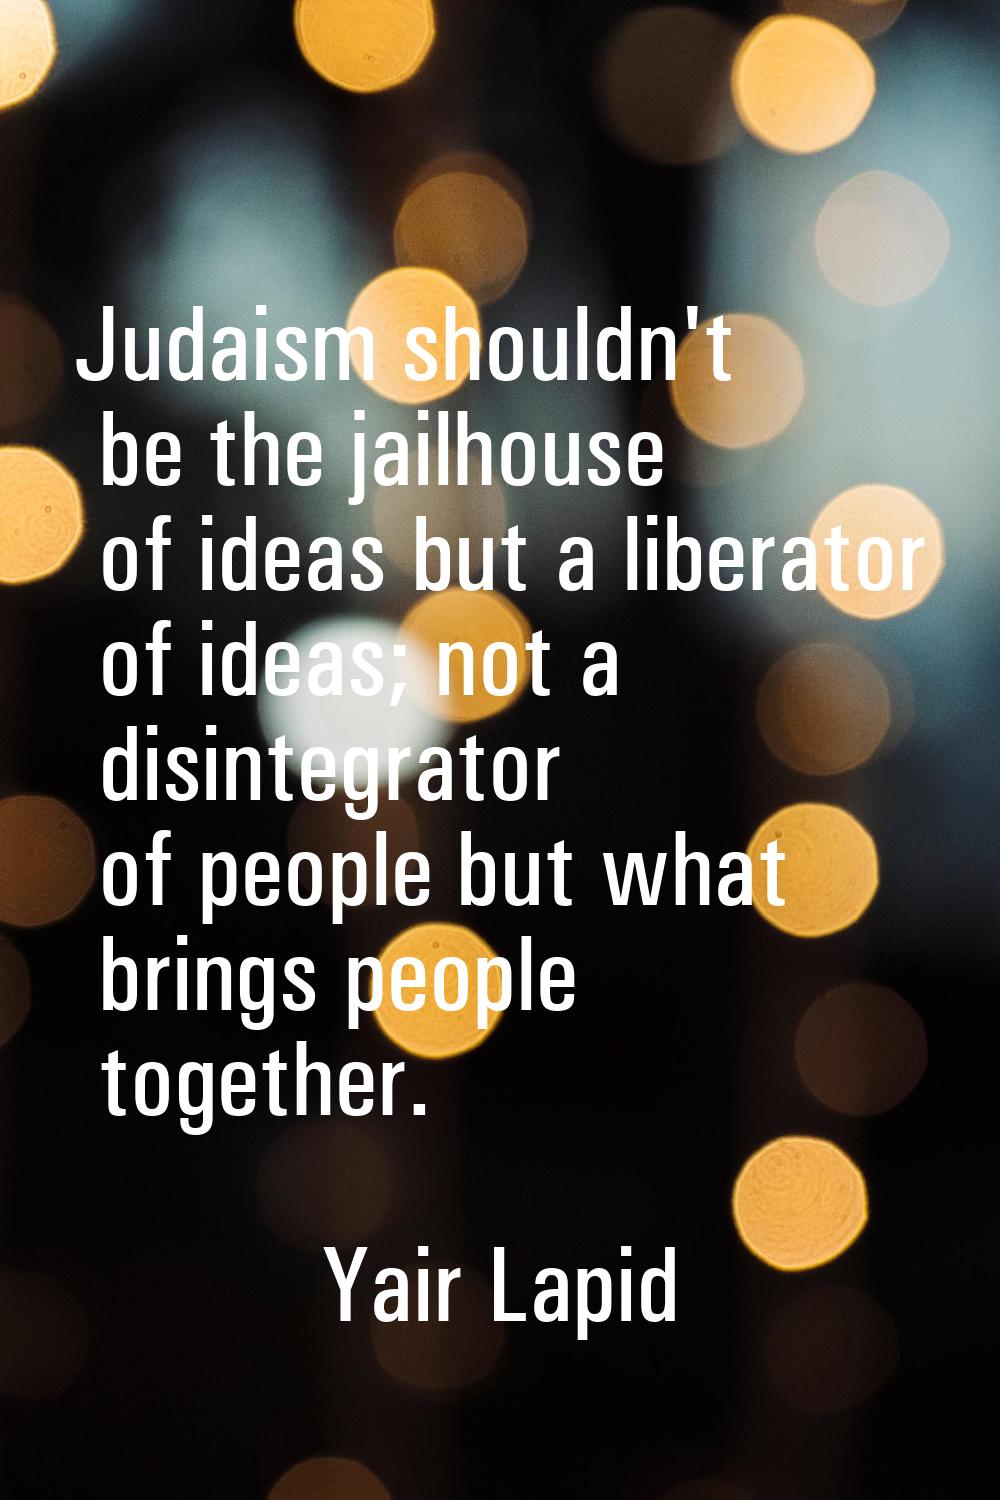 Judaism shouldn't be the jailhouse of ideas but a liberator of ideas; not a disintegrator of people